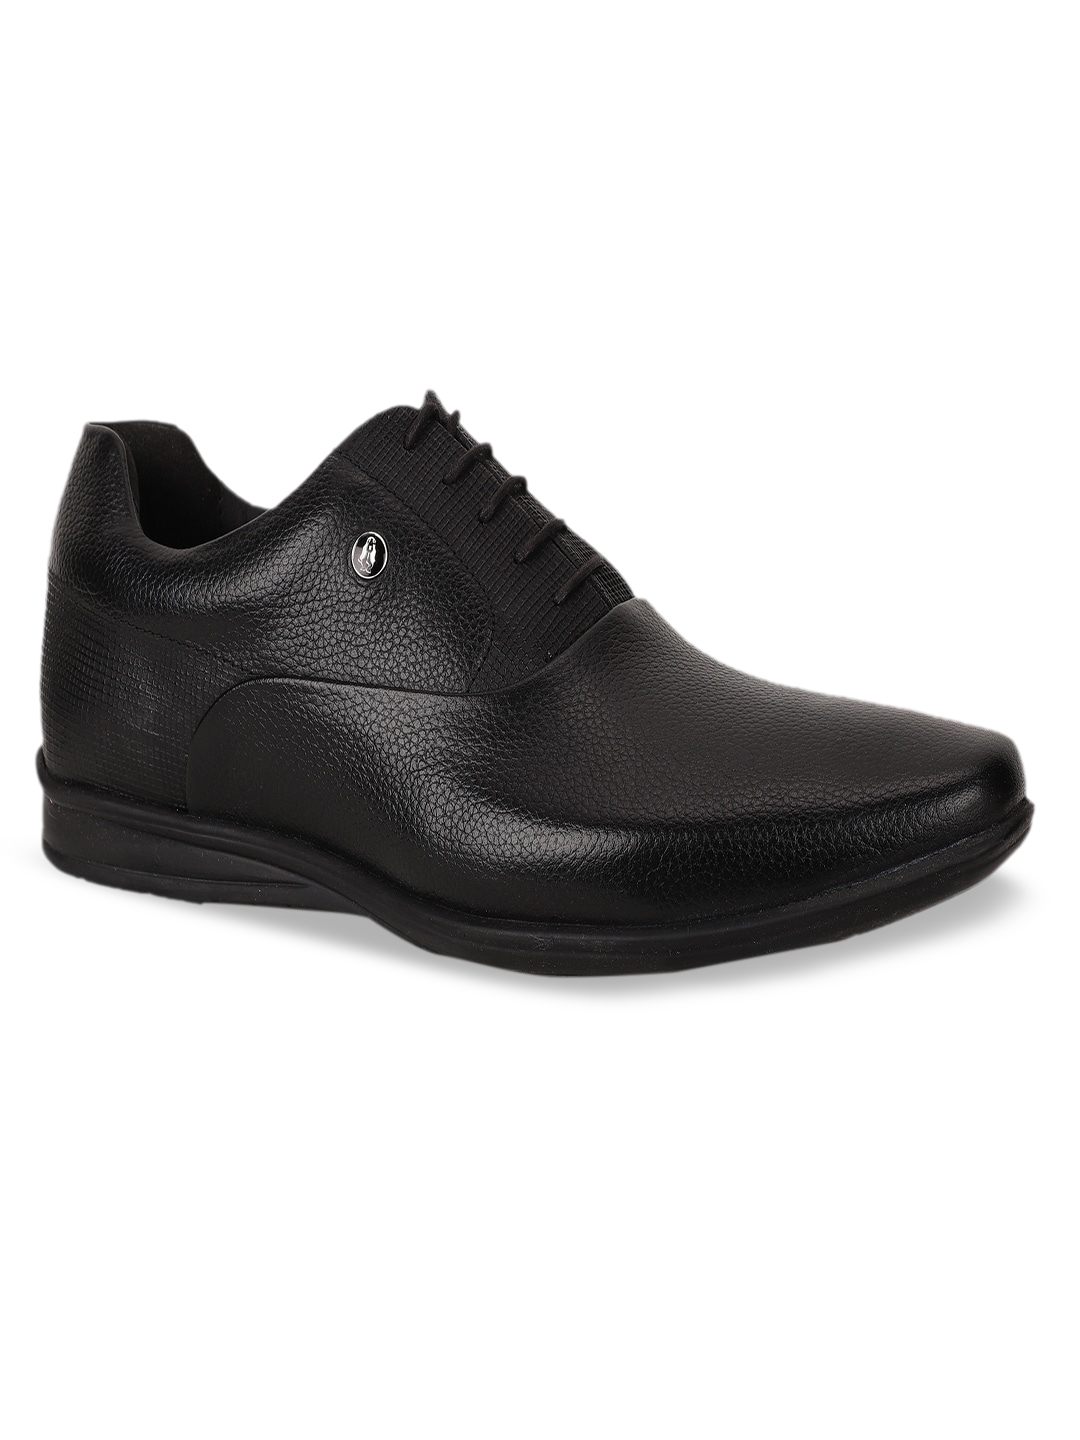 Buy Hush Puppies Men Black Solid Formal Leather Oxfords - Formal Shoes ...